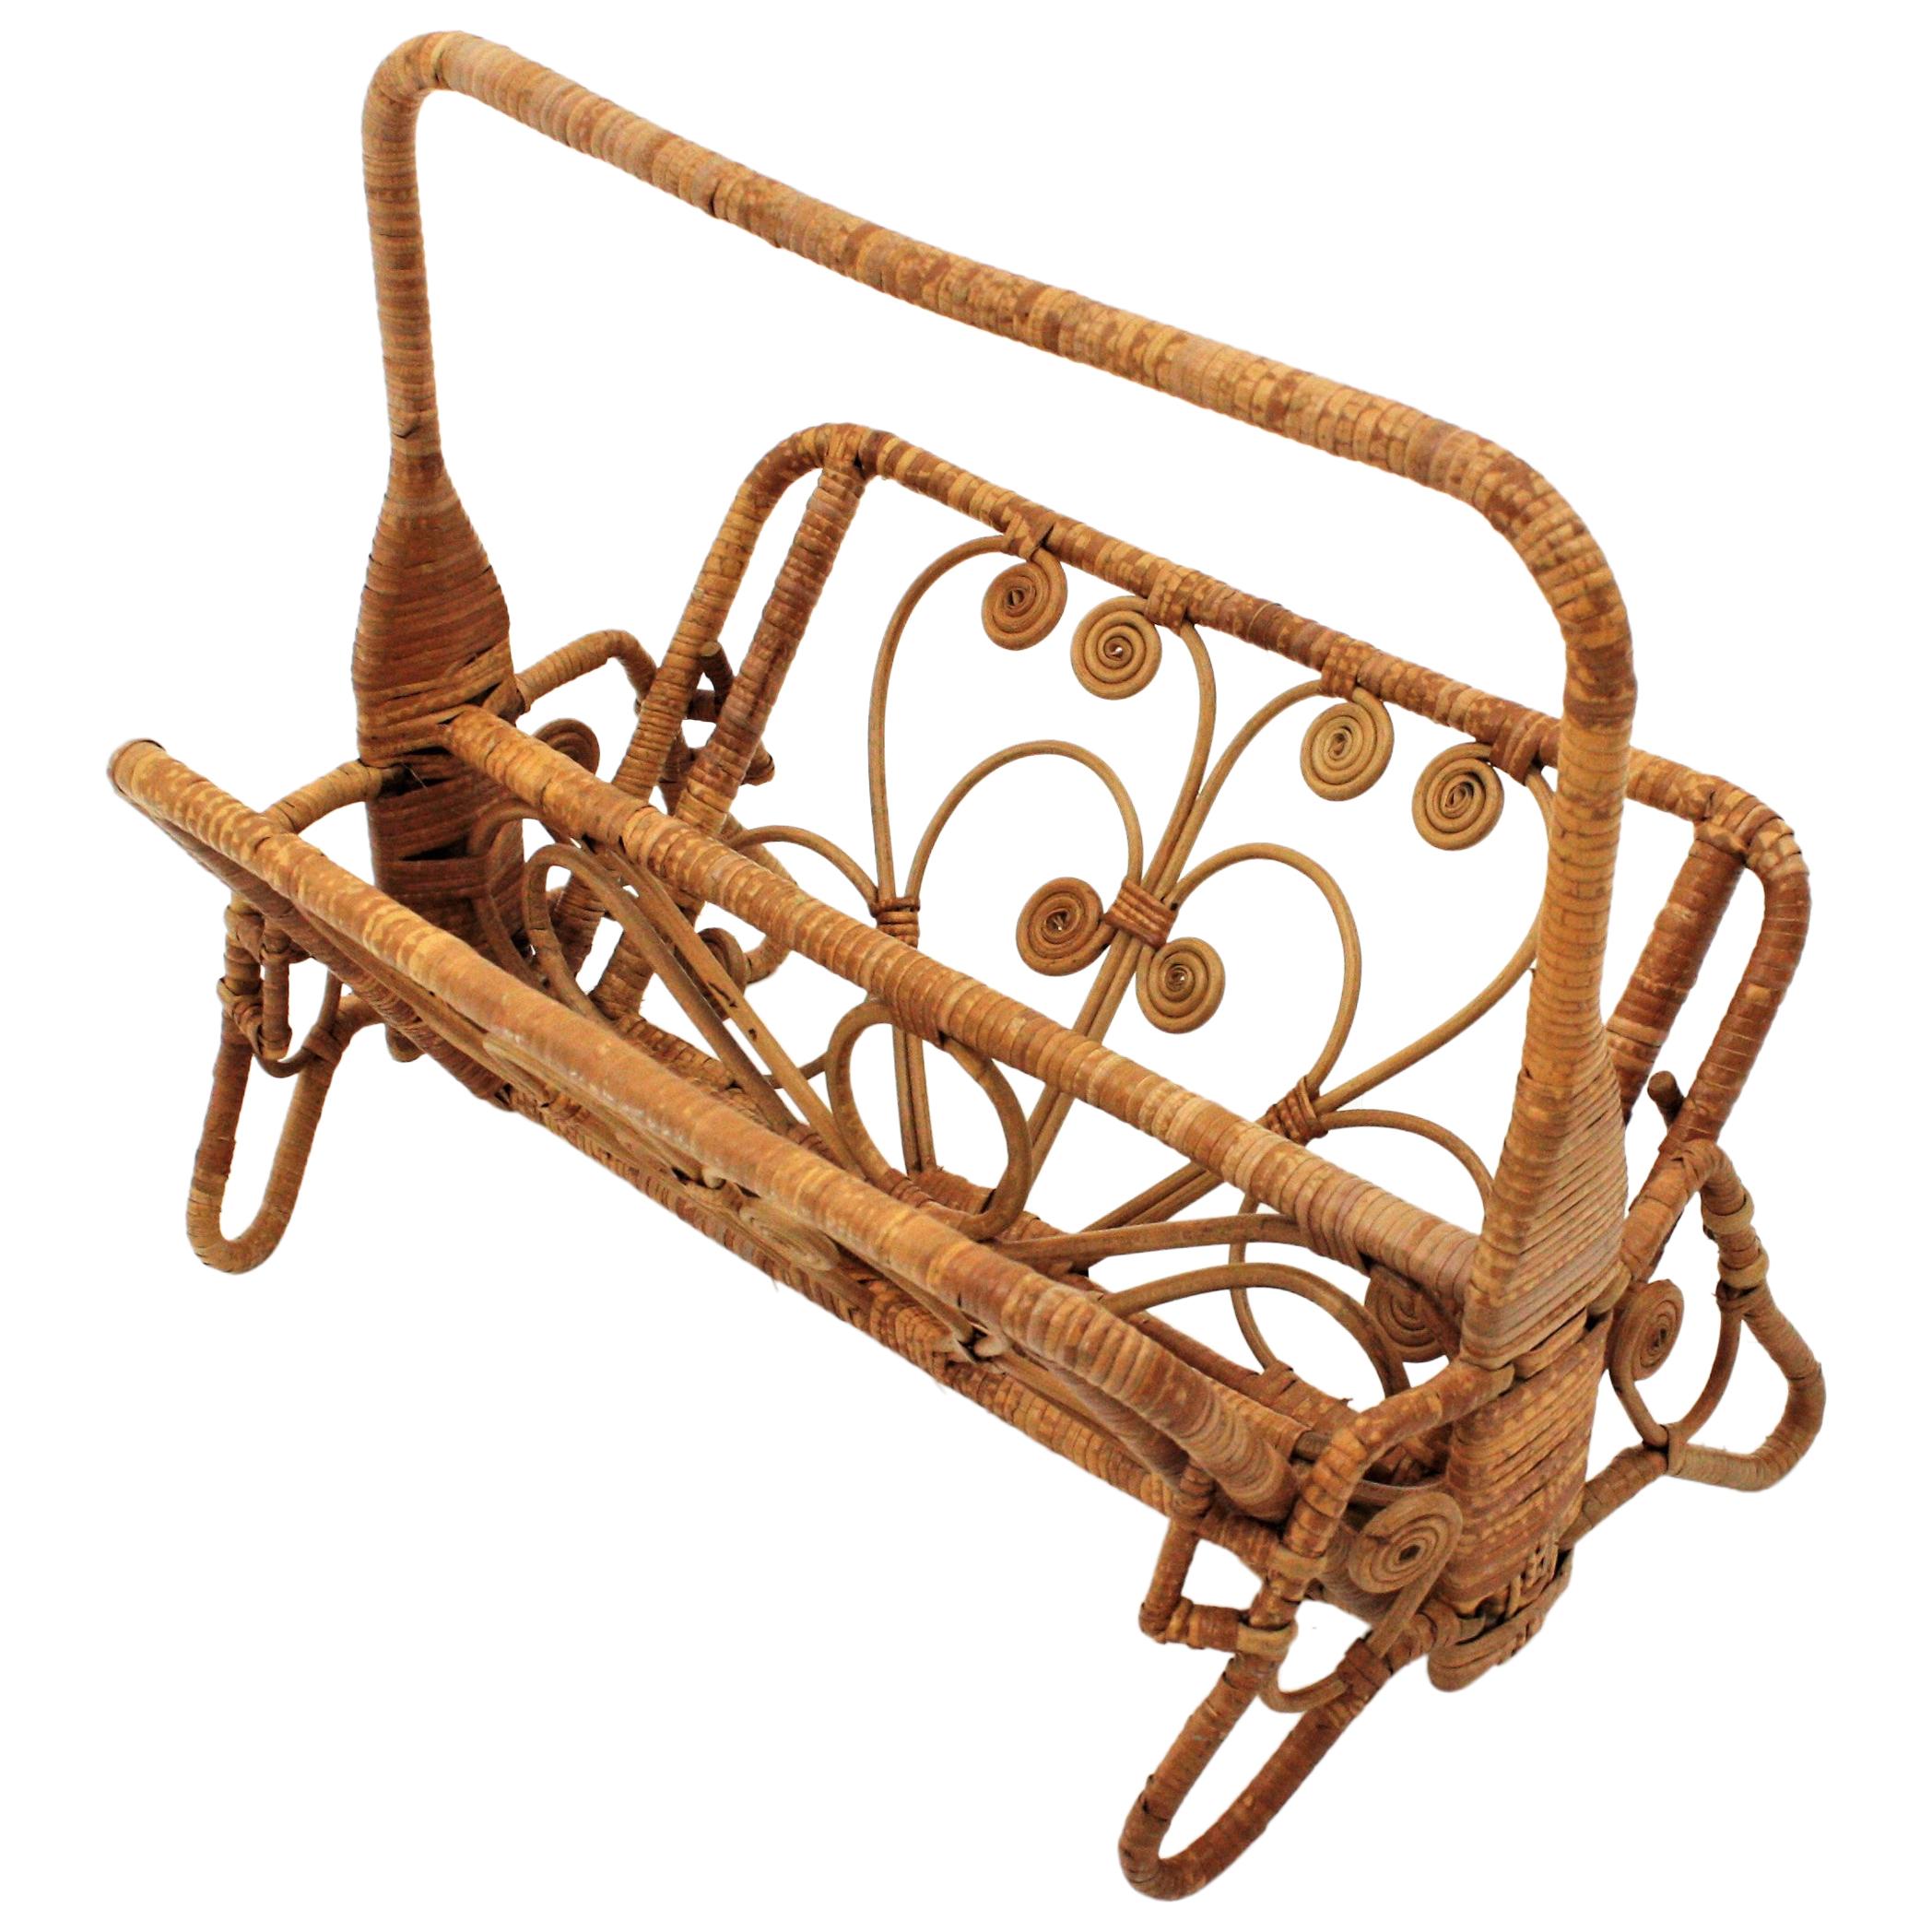 Handcrafted wicker / rattan folding magazine rack with beautiful artistic filigree work. Spain, 1960s.
This magazine / newspapers rack features a wicker structure with a handle and two foldable panels standing on four small legs. Beautifully